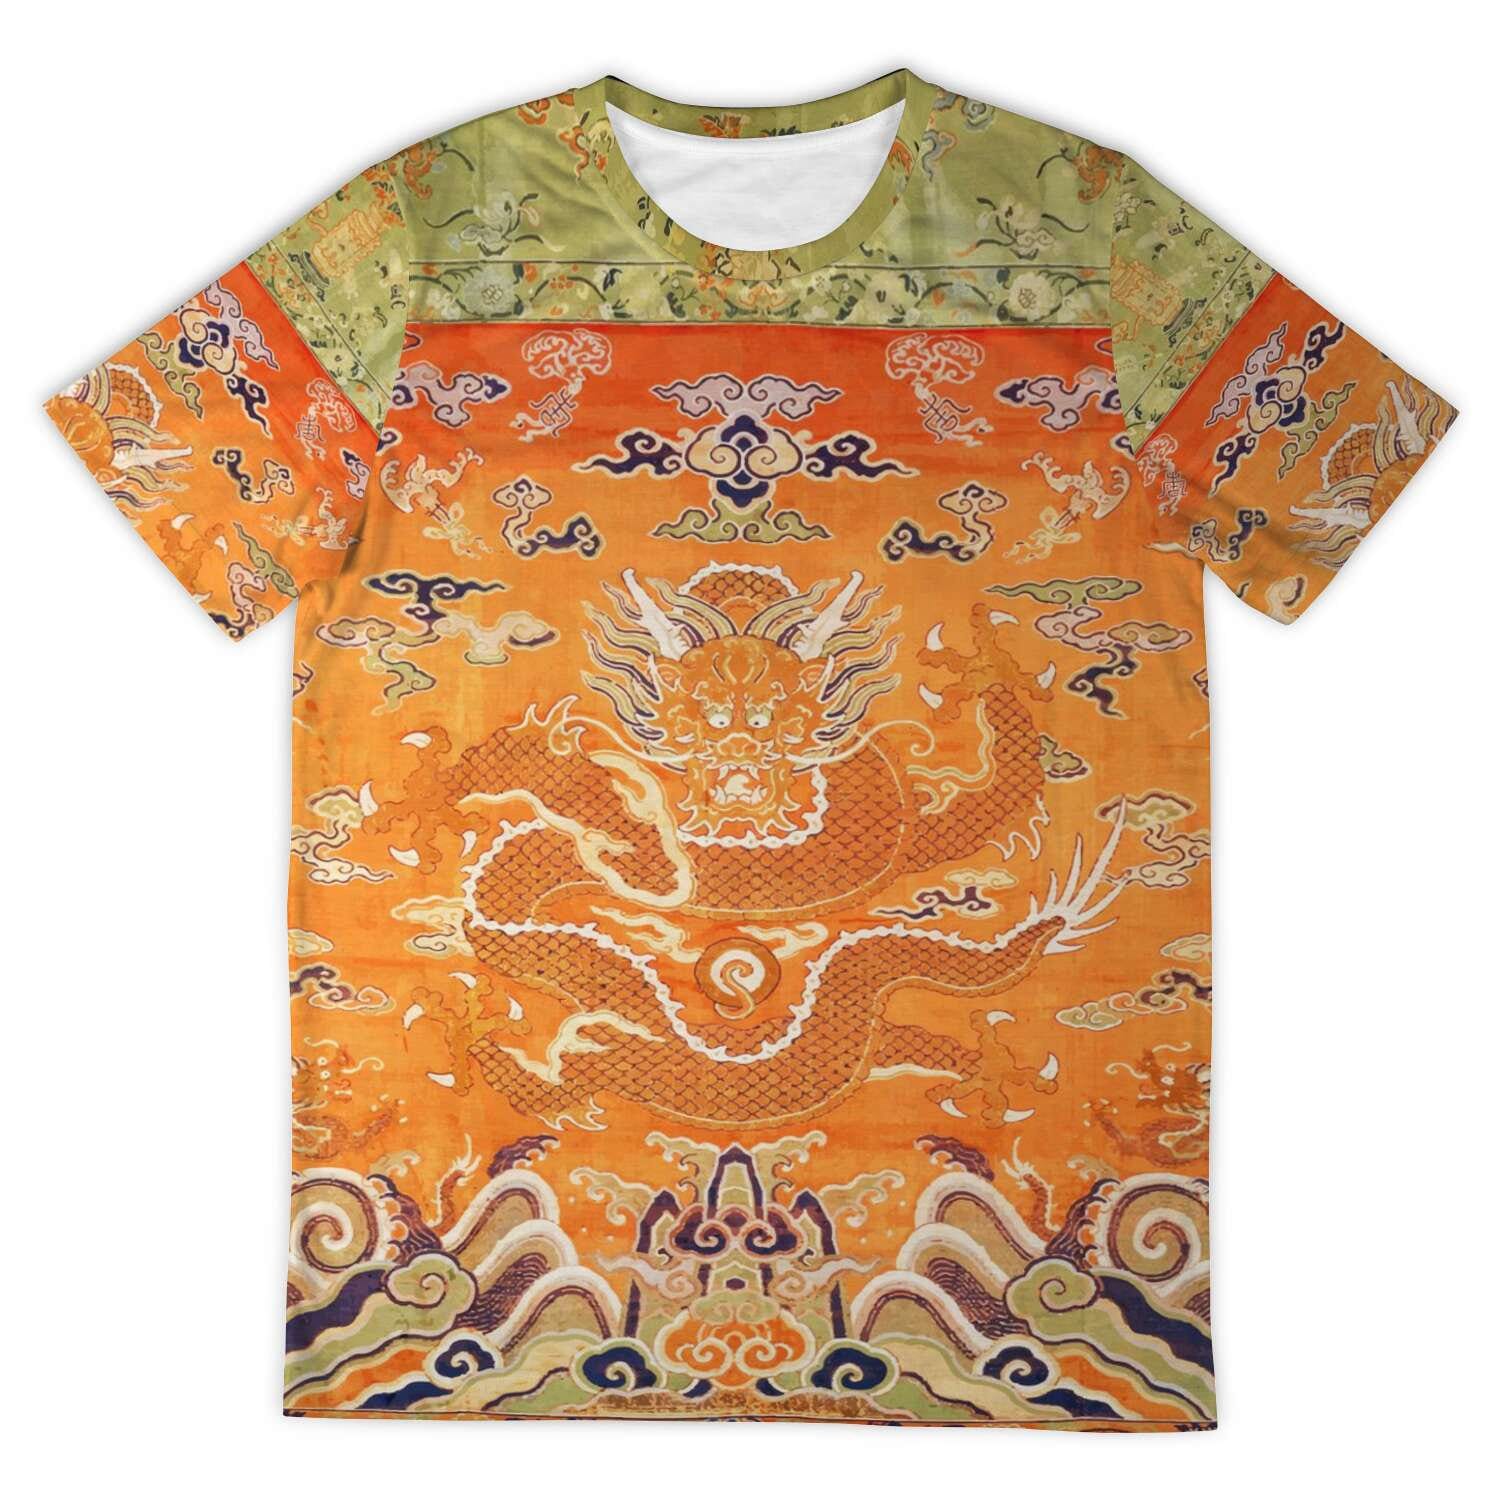 AOP T-Shirt Ming Dynasty East Asian Chinese Taoist Dragon Serpent Mystical Antique Vintage Graphic Art All-Over-Print T-Shirt